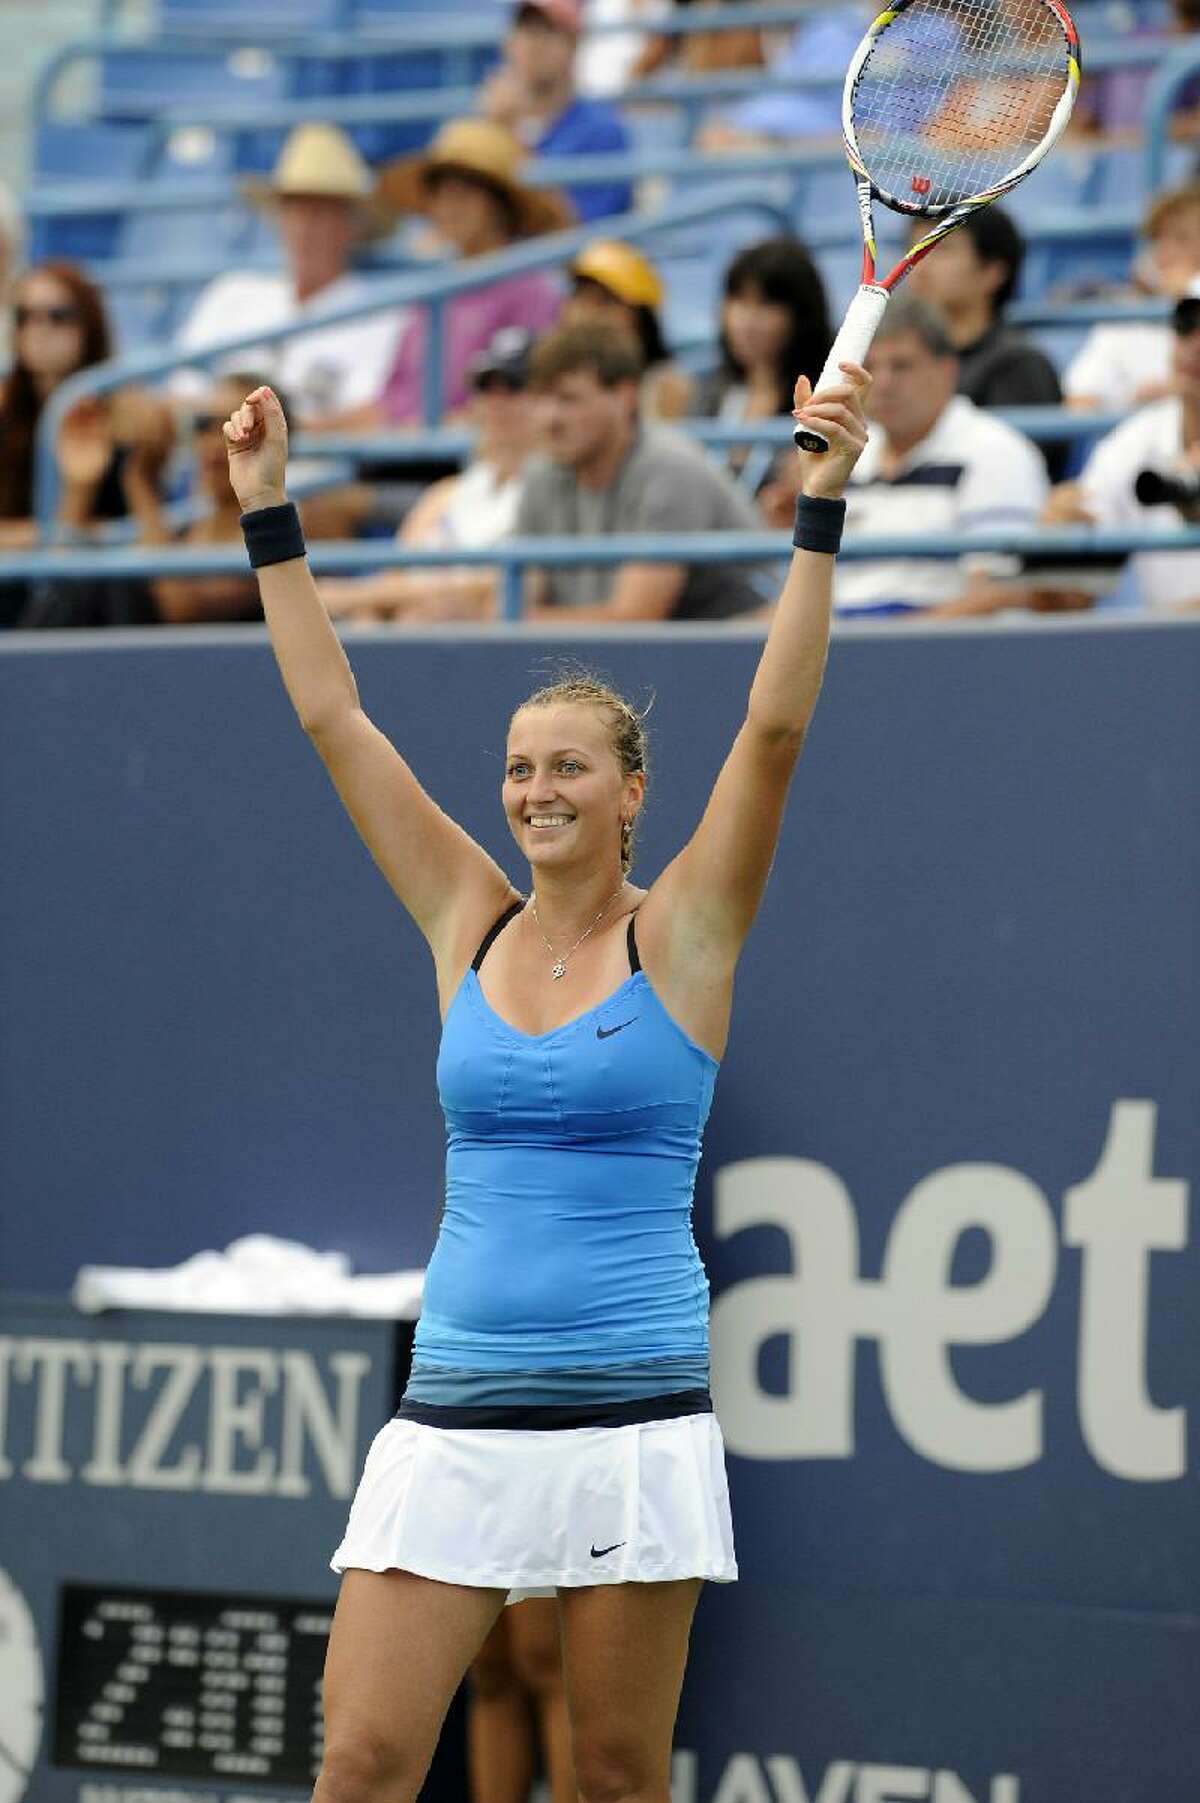 ASSOCIATED PRESS Petra Kvitova, of the Czech Republic, celebrates after her 7-6 (9), 7-5 victory over Maria Kirilenko, of Russia, in the title match of the New Haven Open tennis tournament in New Haven on Saturday.